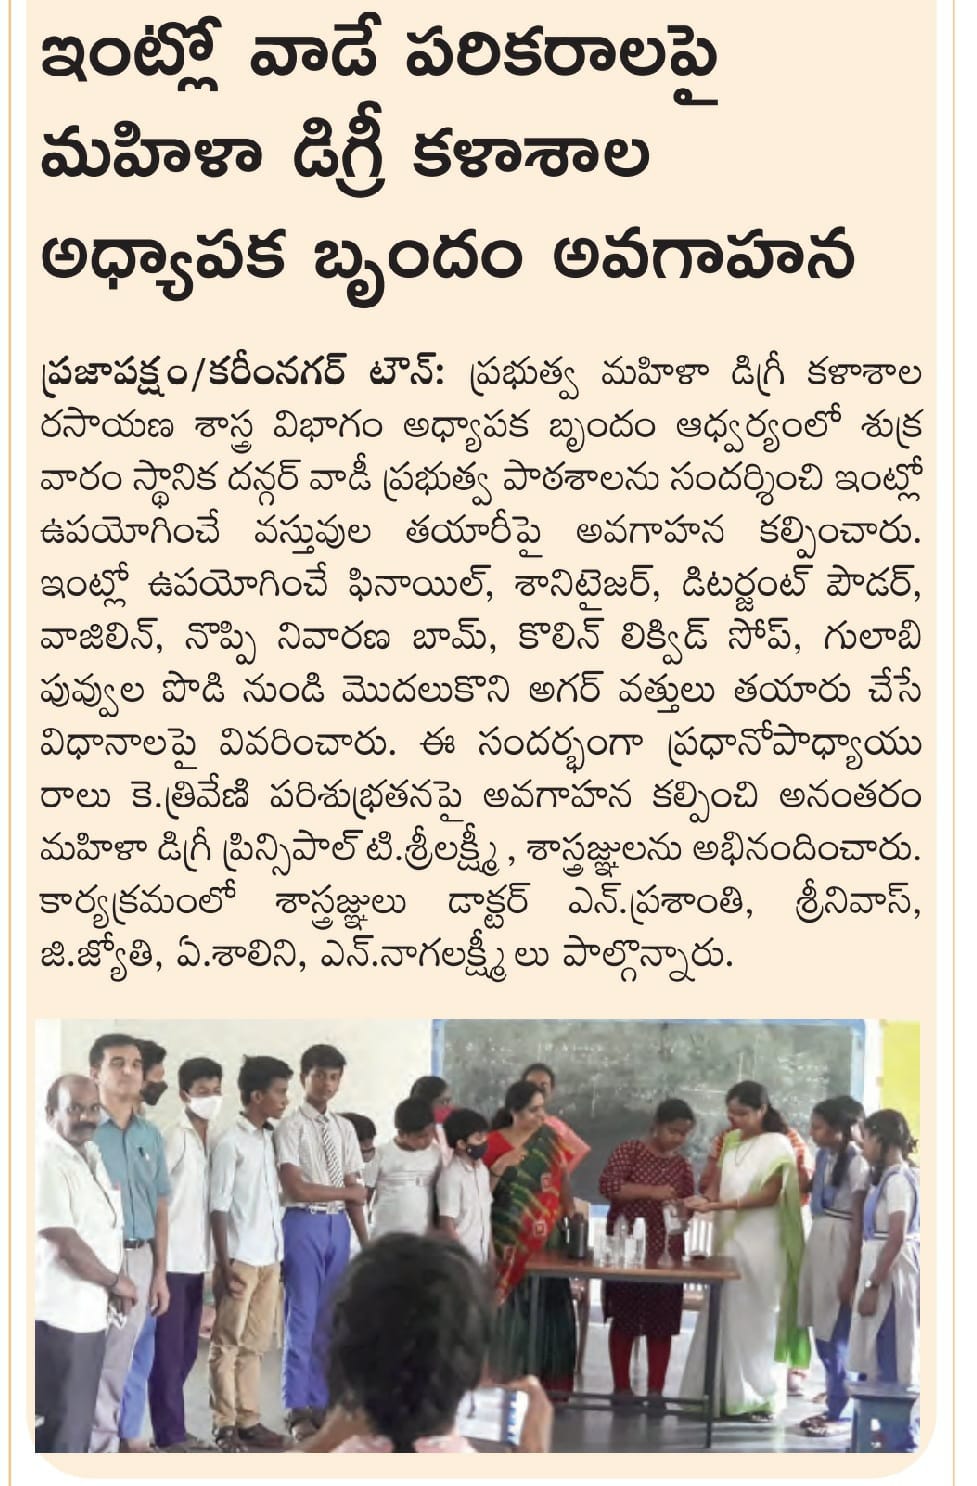 Dept. Of Chemistry Organized A Field Visit to School